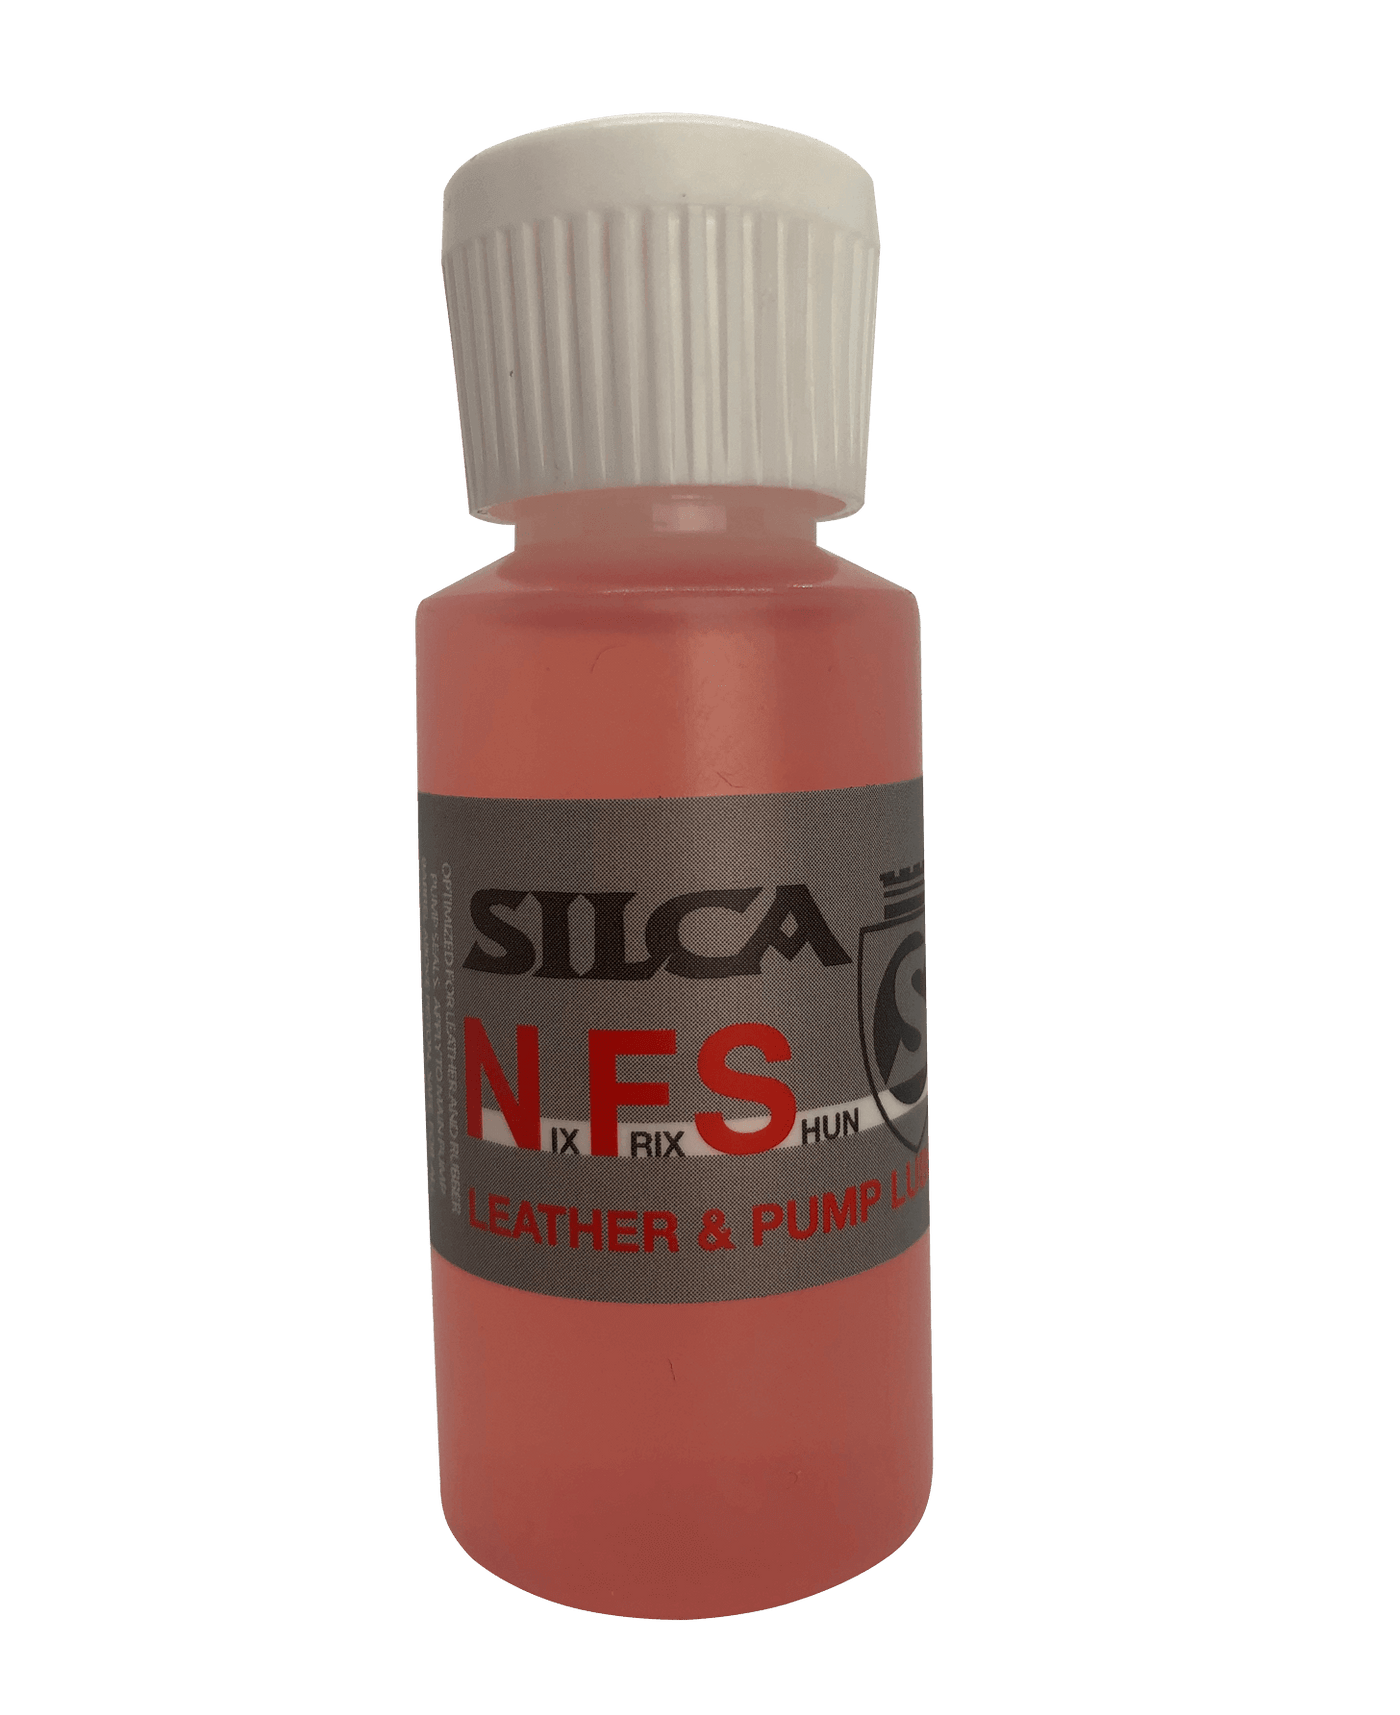 NFS Leather Conditioner and Pump lubricant 1 oz. (aka: Pump Blood) - SILCA